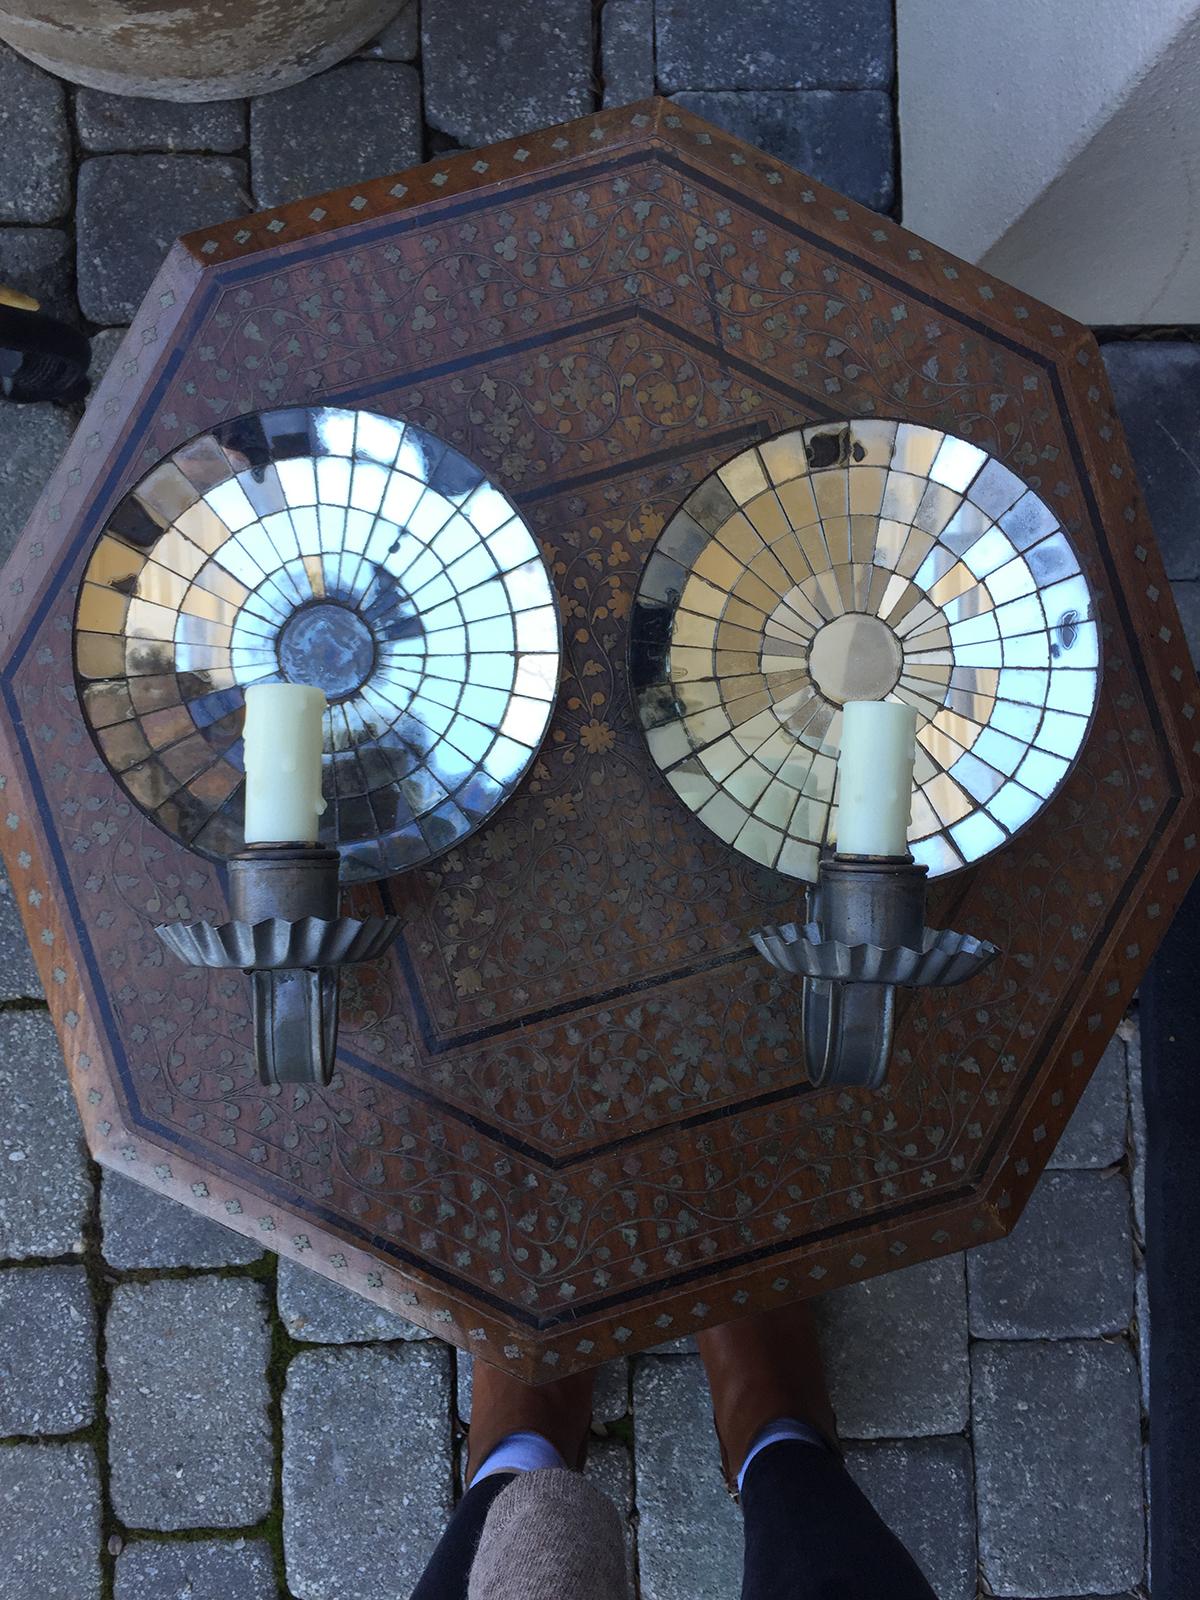 Pair of 20th century American round mirror back sconces
Brand new wiring